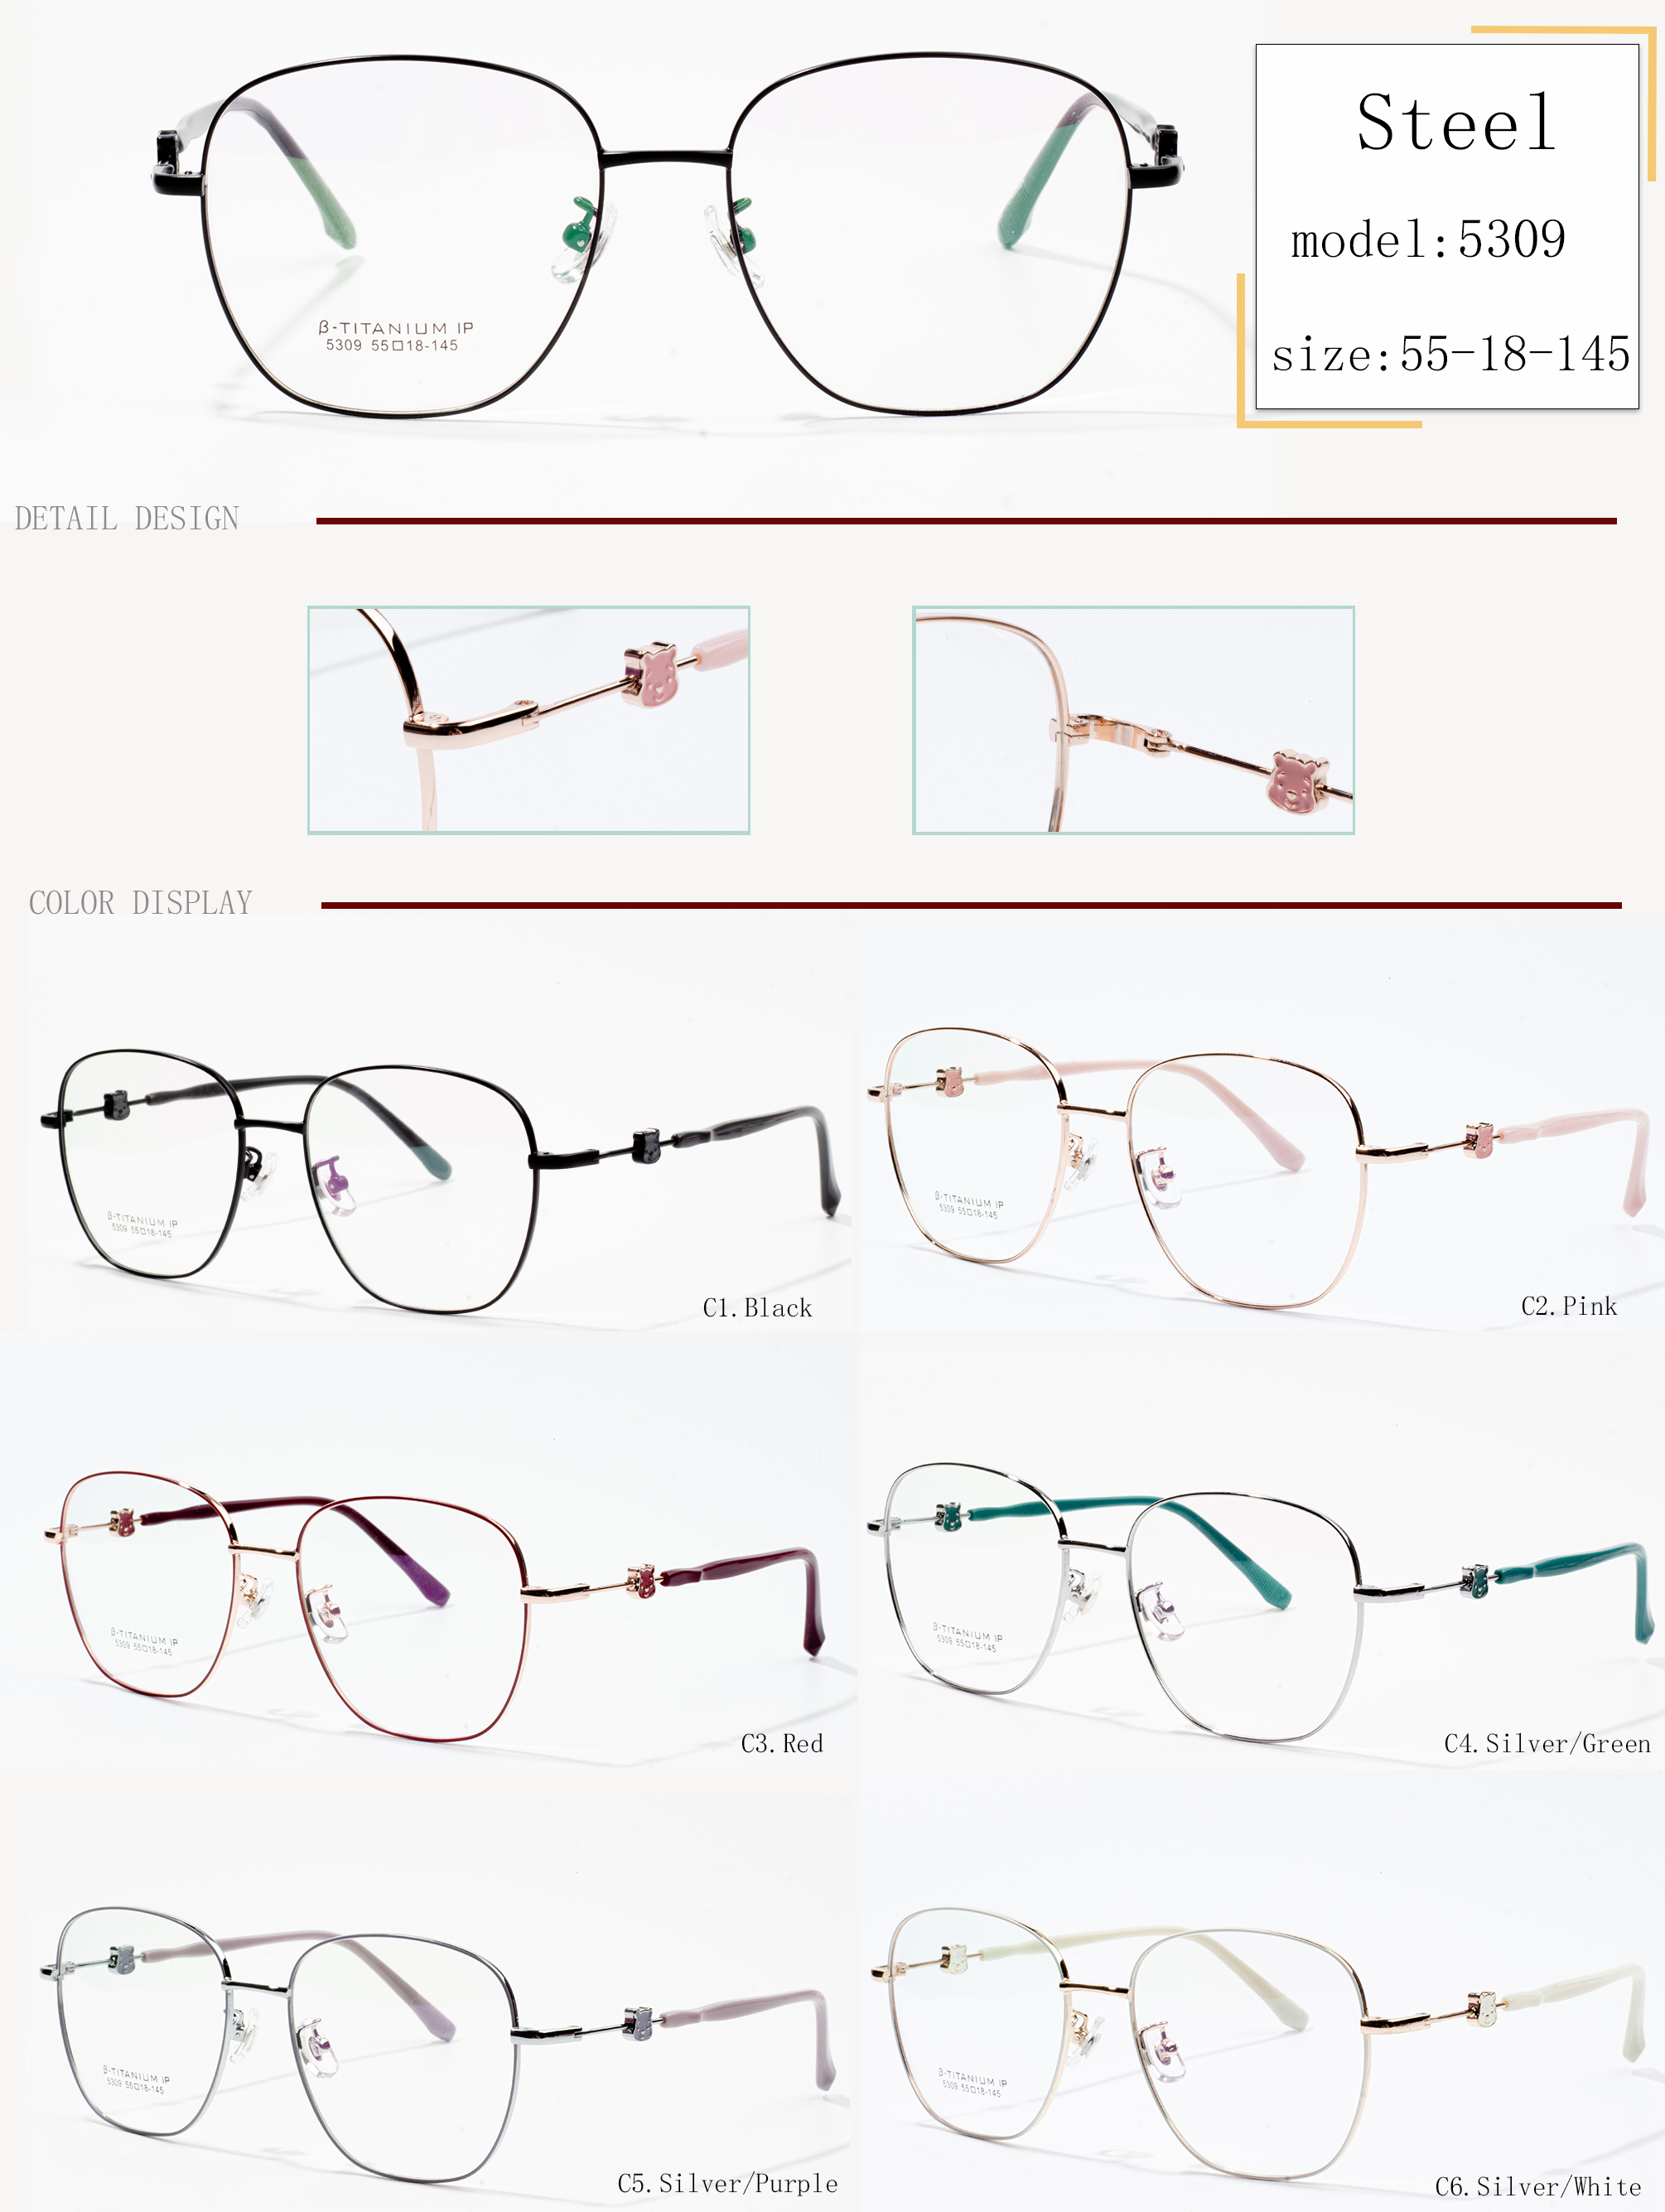 eyeglass frames are in style